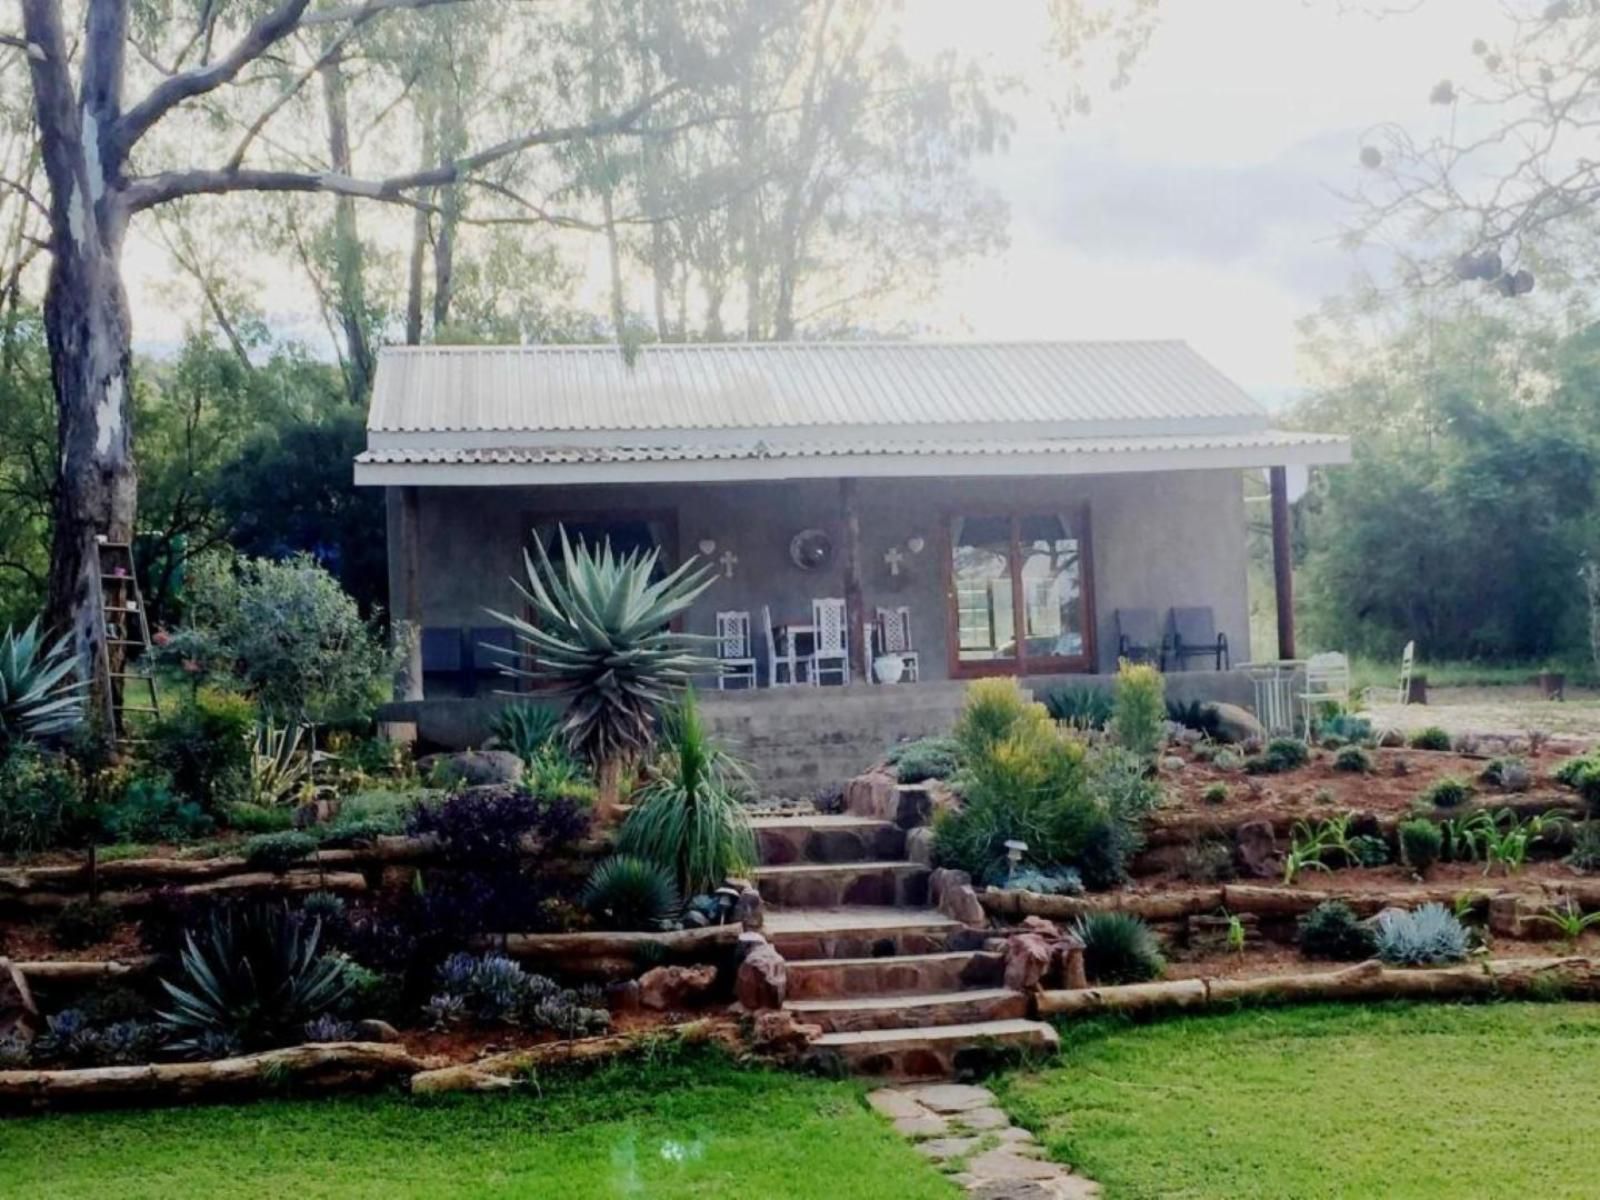 Hadida Guesthouse Swartruggens North West Province South Africa Garden, Nature, Plant